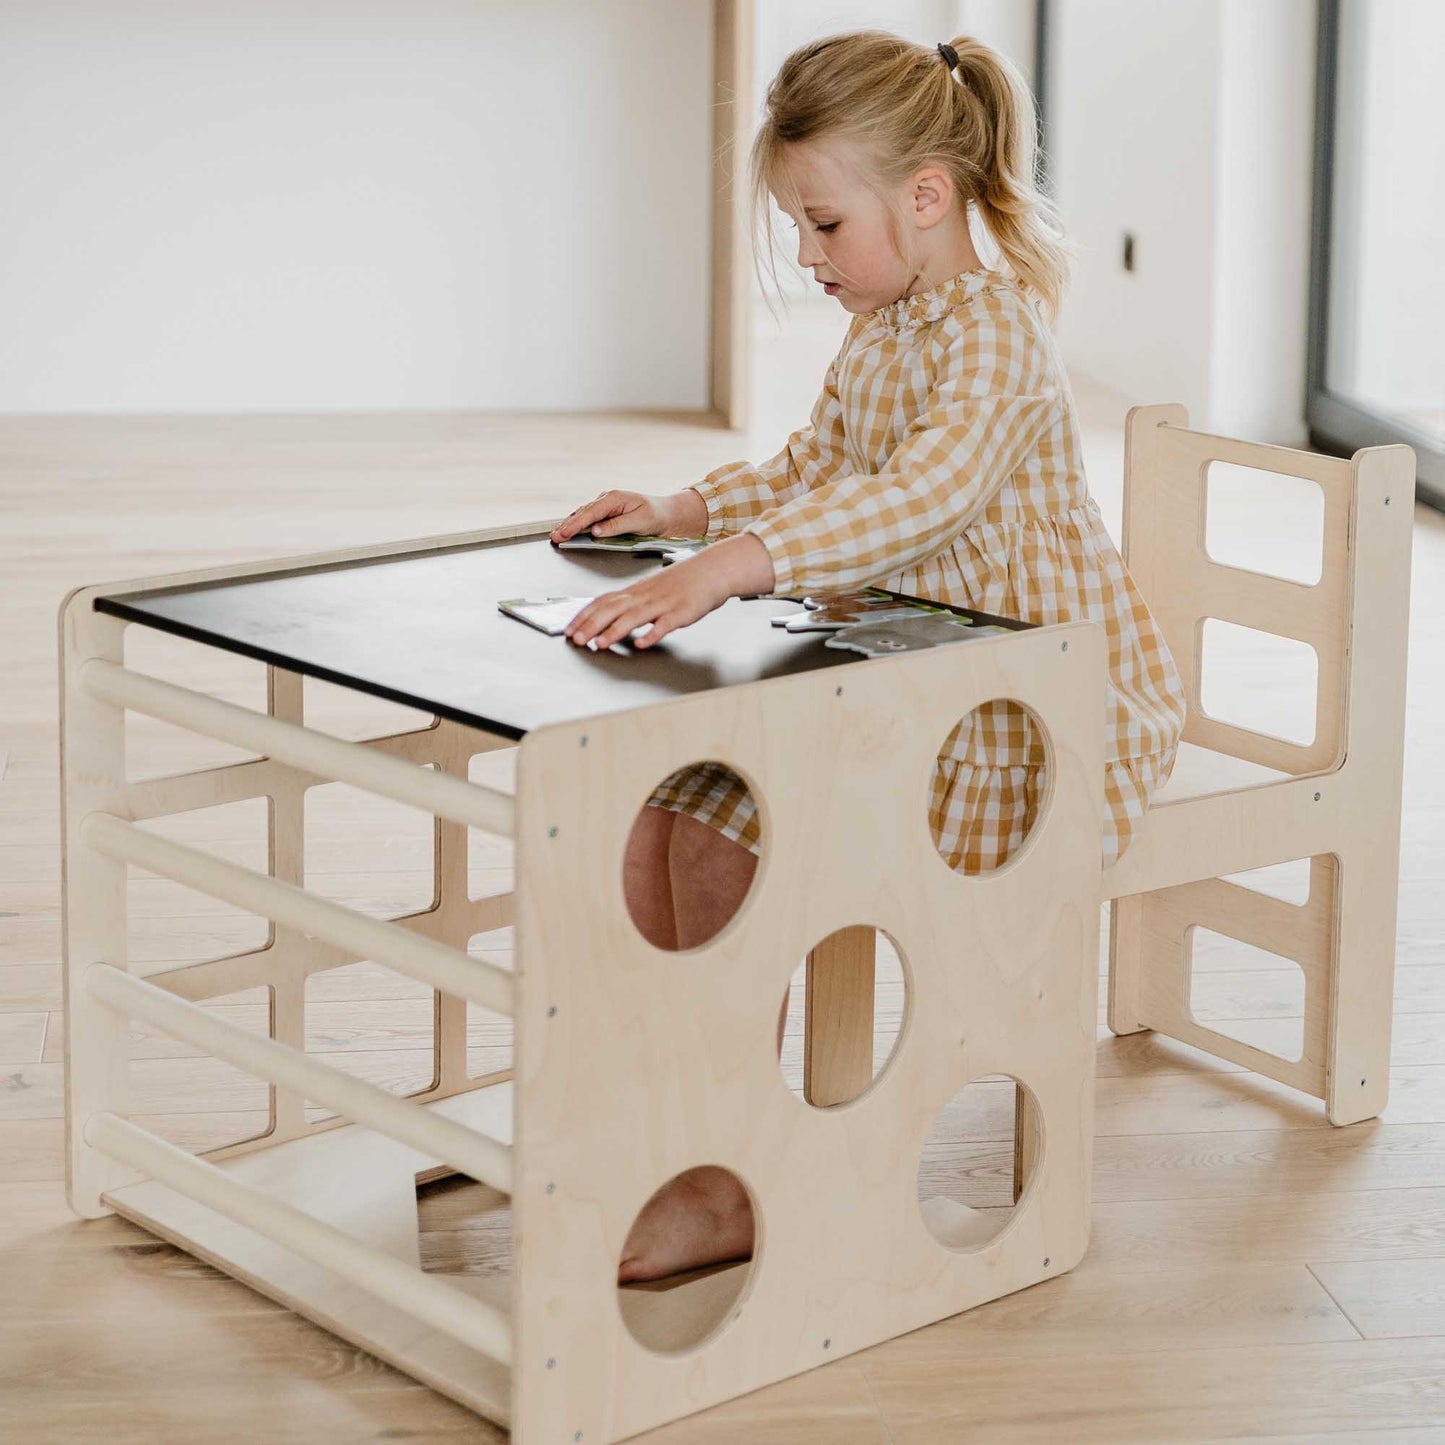 A little girl engaging in climbing fun with the Transformable triangle + climbing cube at a wooden desk.